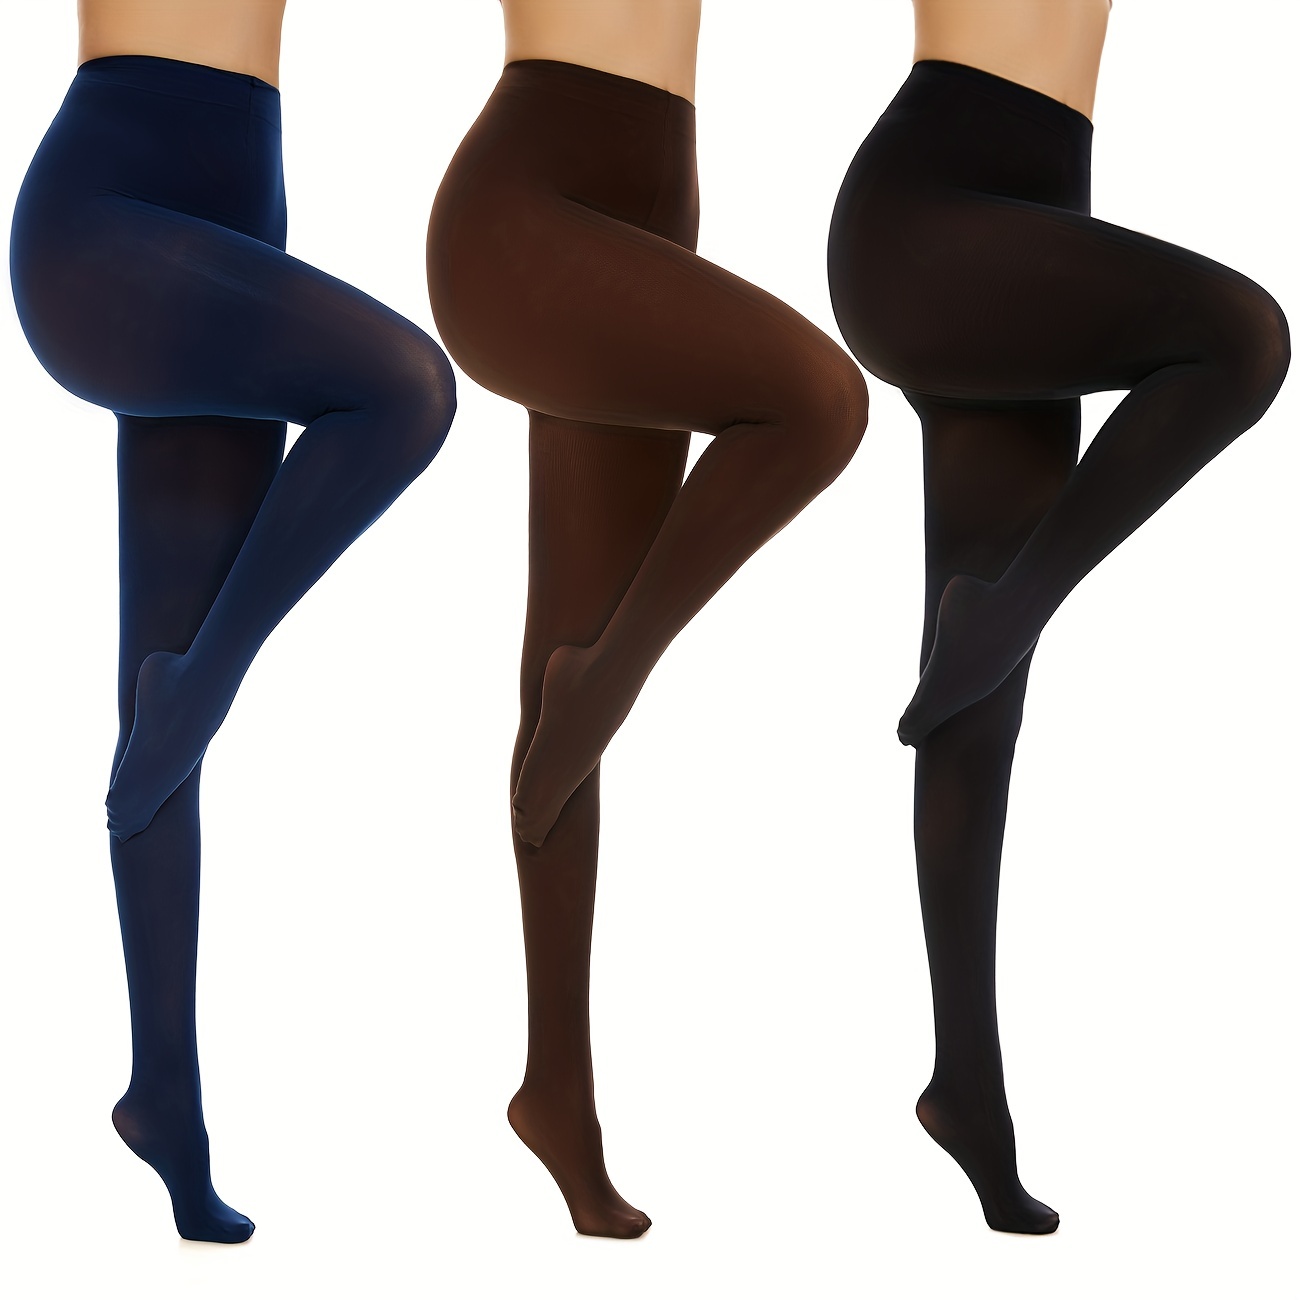 Lycot Black Navy Assorted Premium Quality 3/4 Plain Tights For